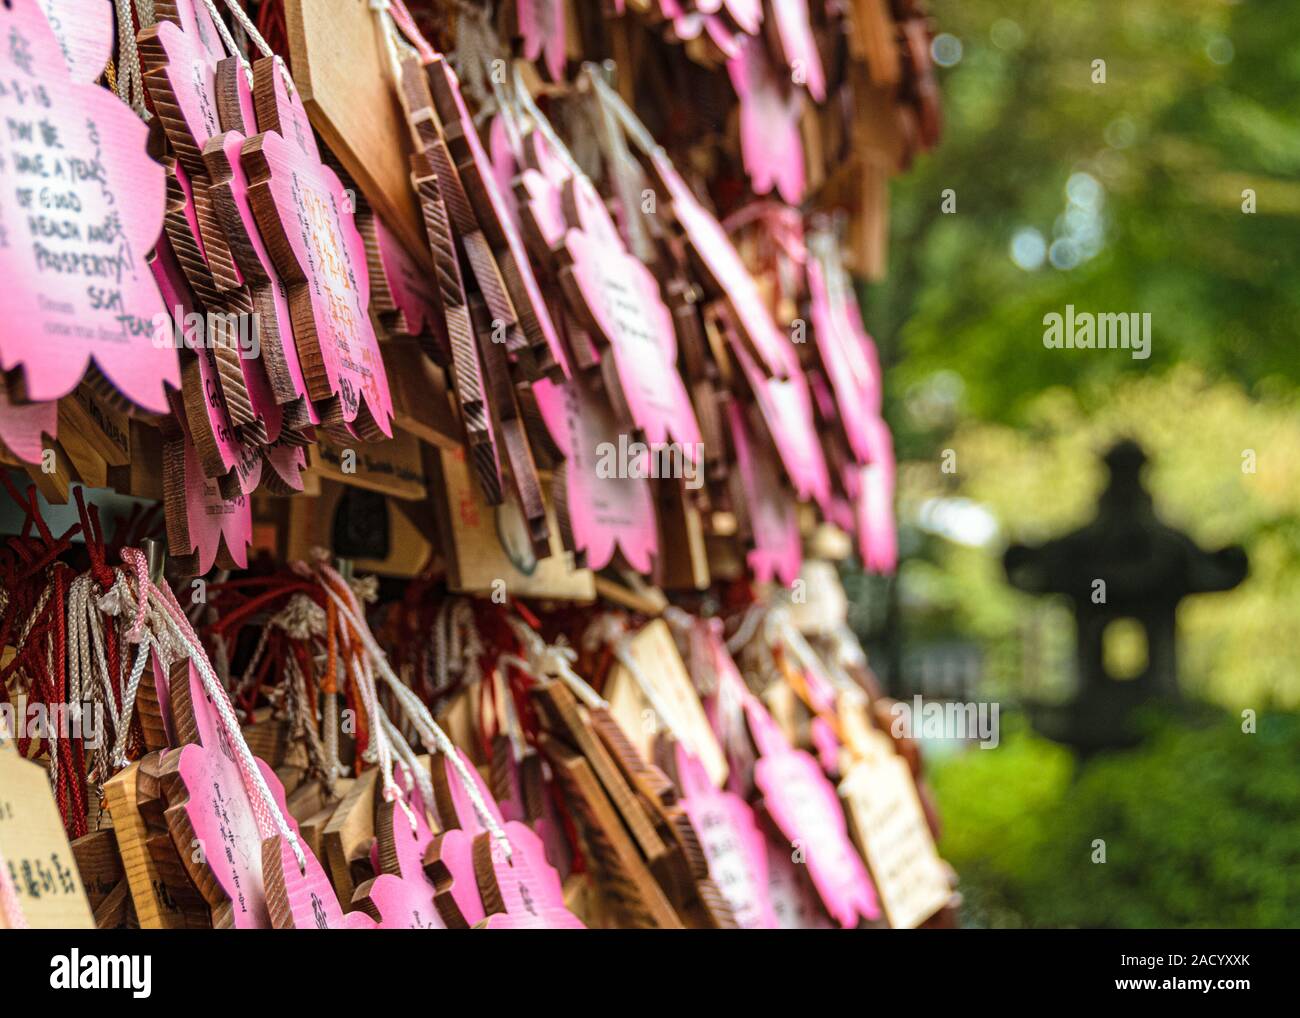 Stacks of woden 'ema' votive plaques in one of the Tokyo's temples, Japan Stock Photo